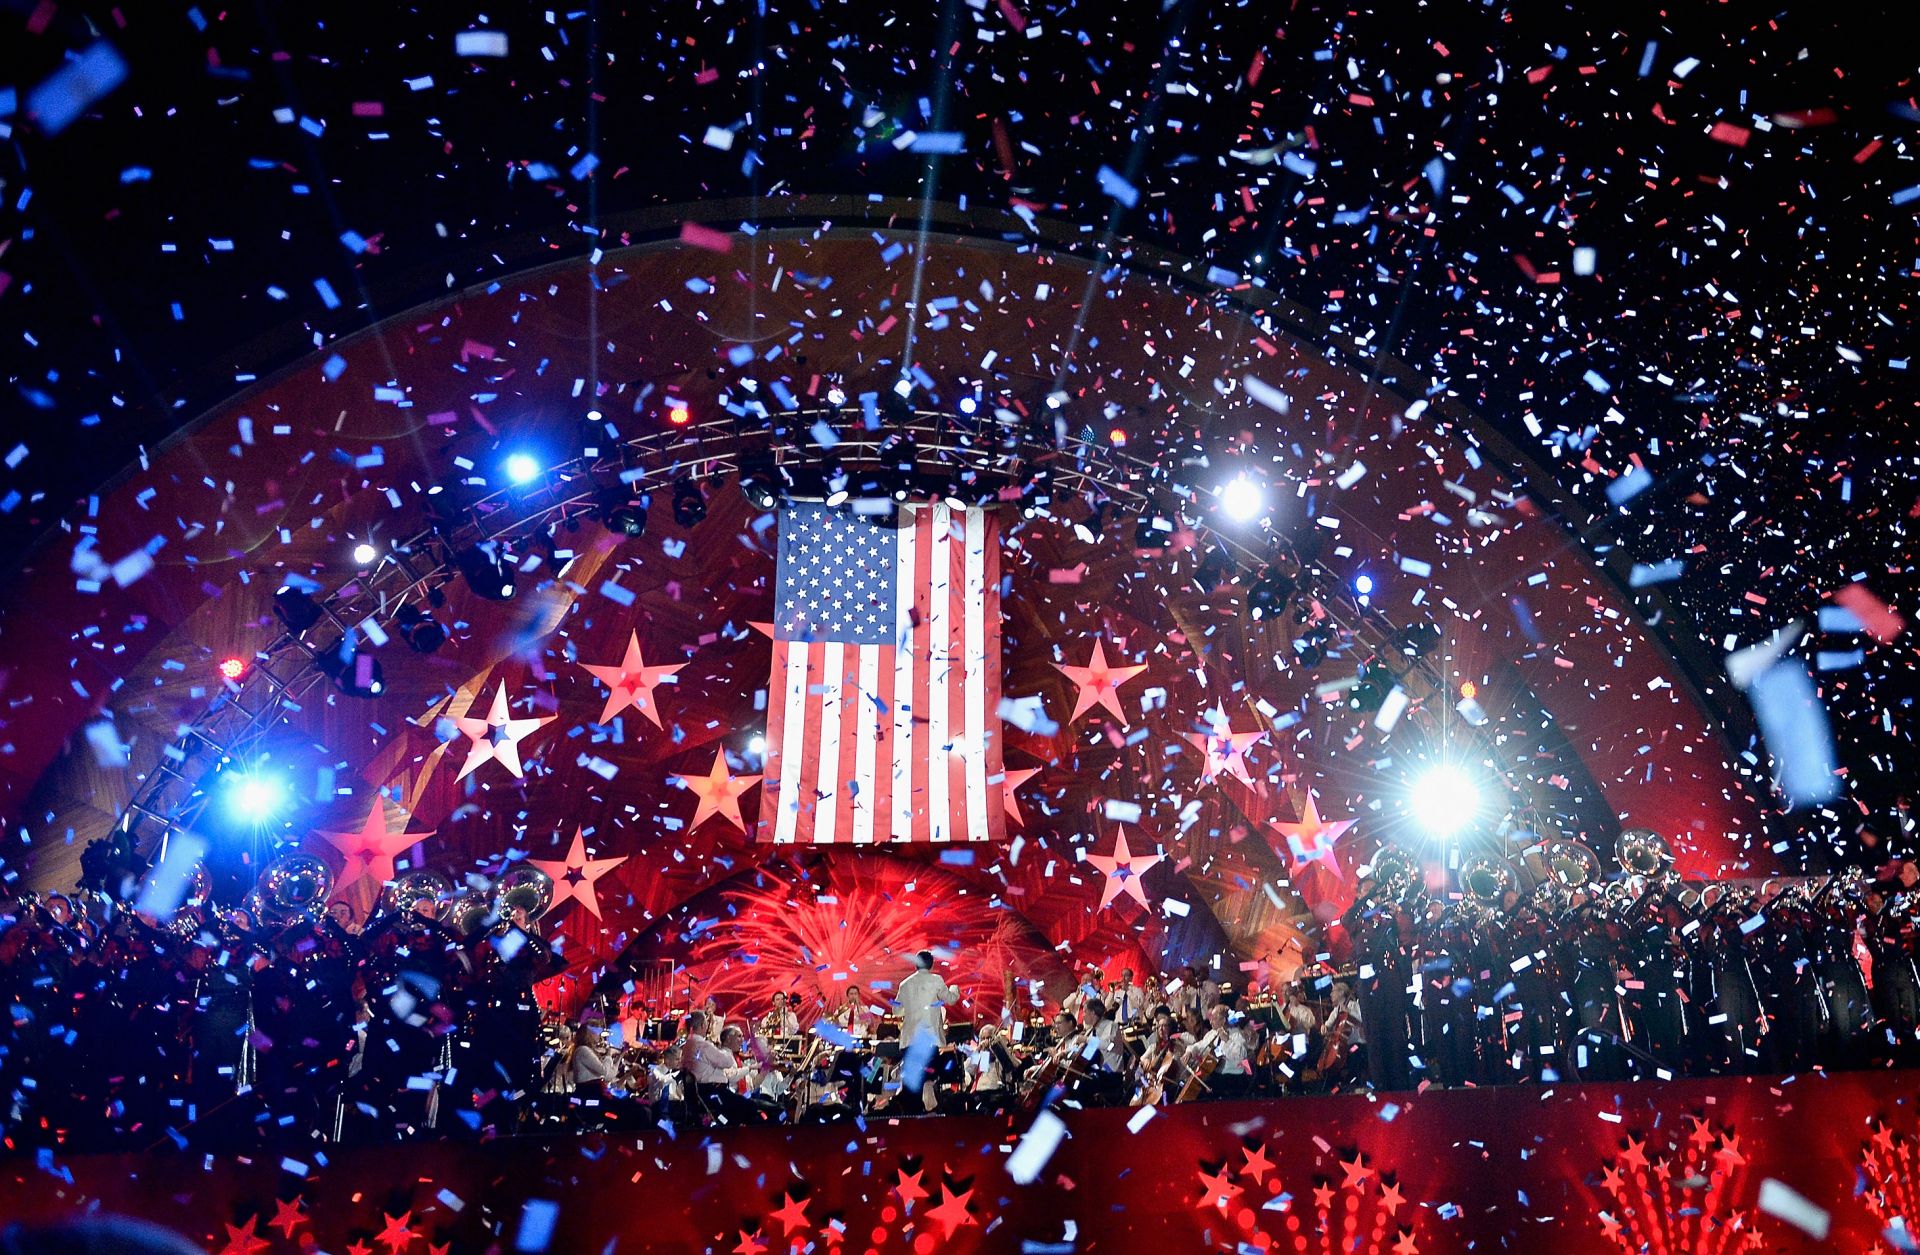 The Boston Pops Orchestra rehearses for a Fourth of July fireworks show on July 3, 2015, in Boston, Massachusetts.